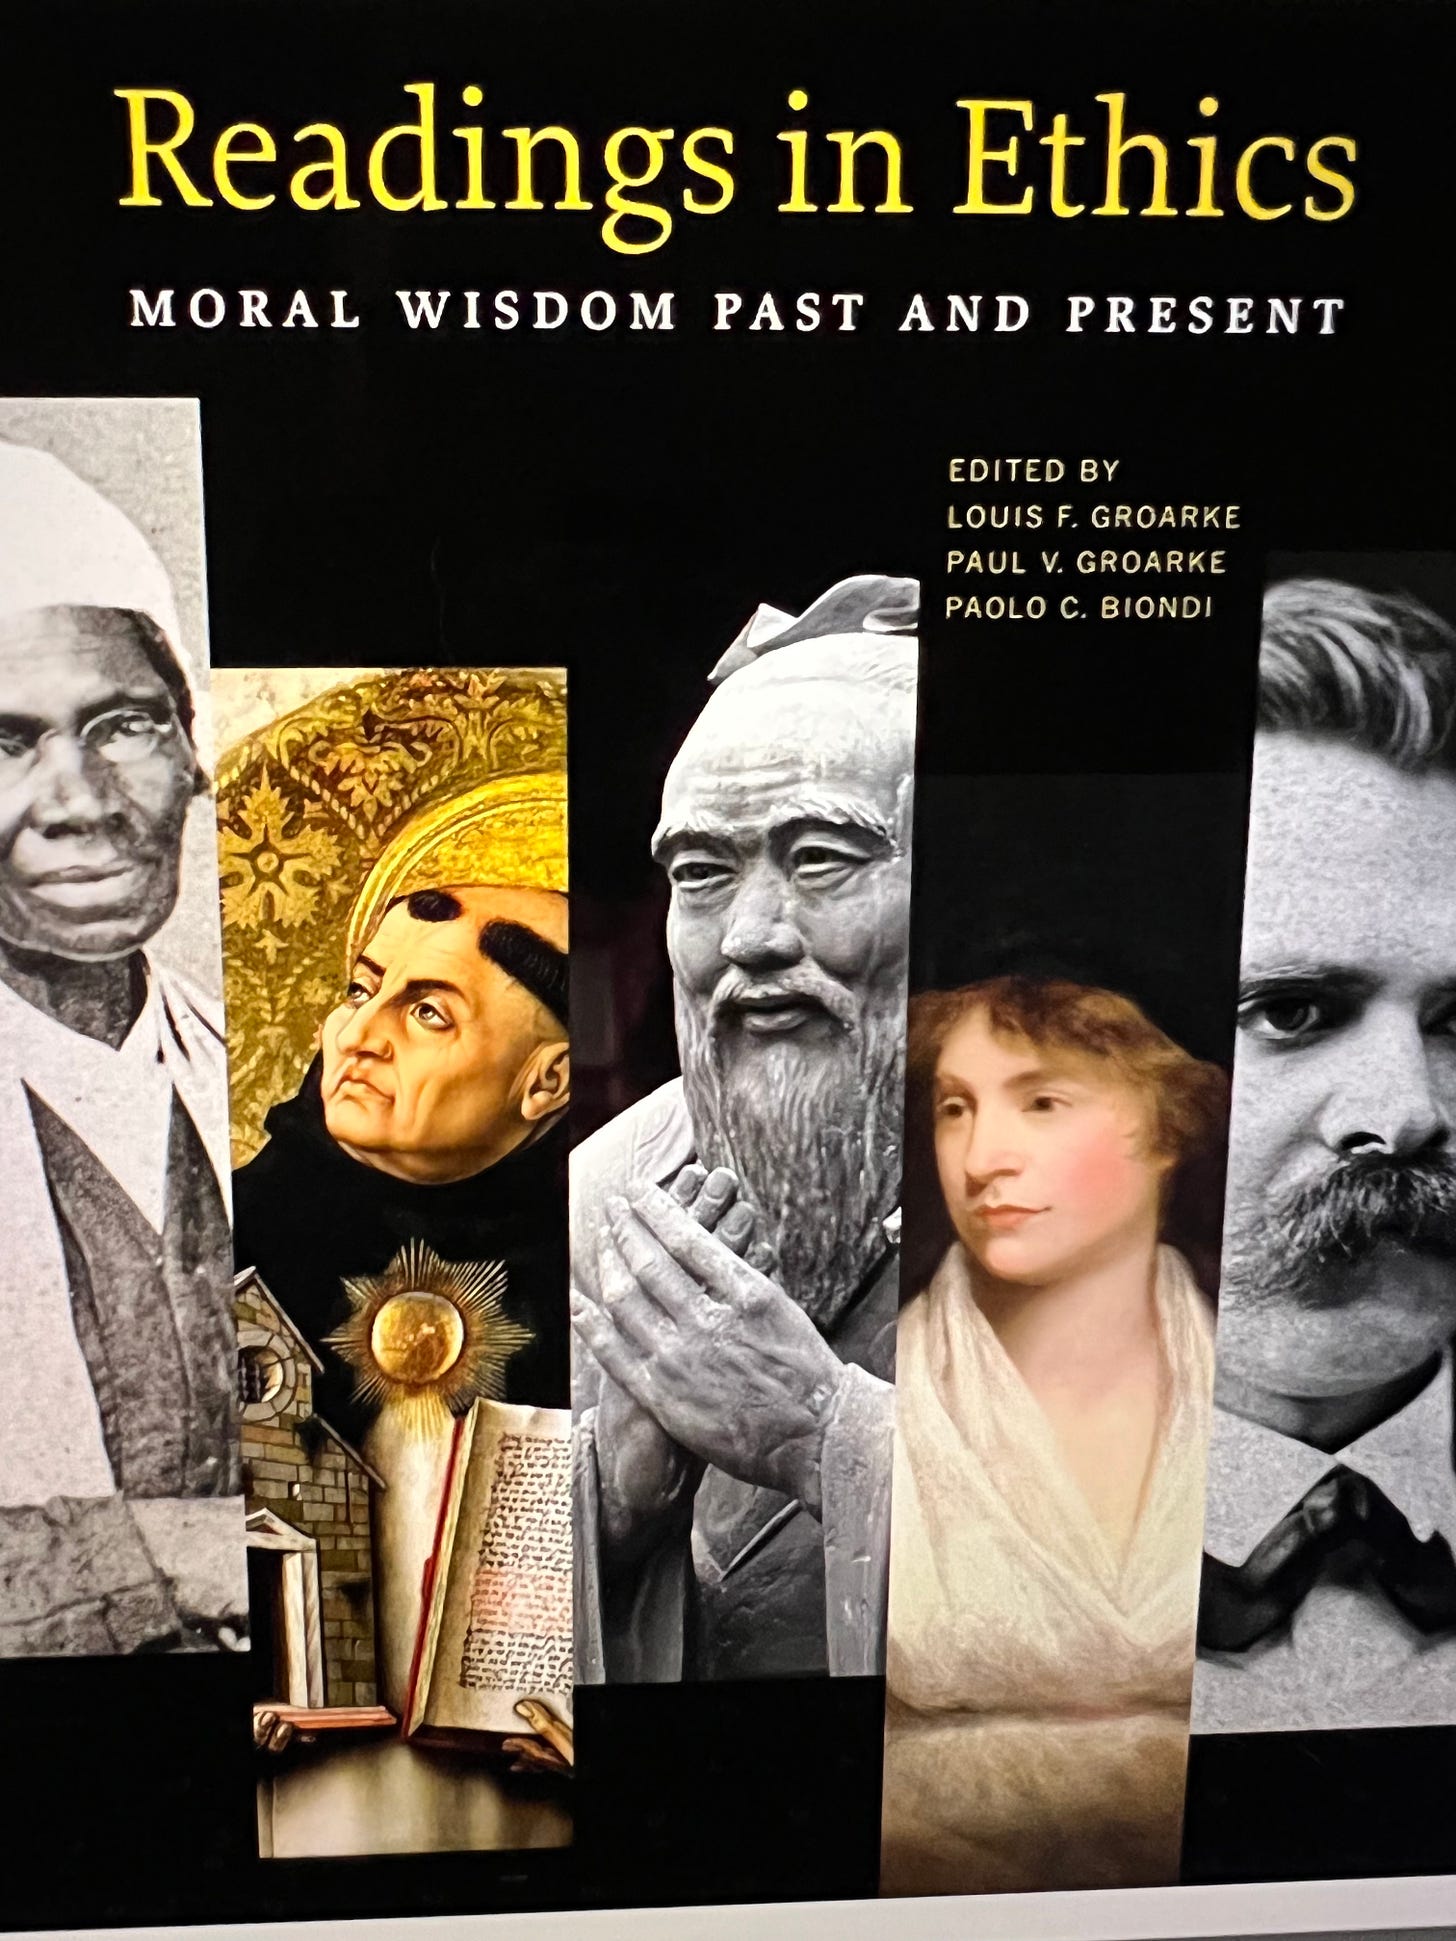 Copy of the book cover Readings in Ethics: Moral Wisdom Past and Present